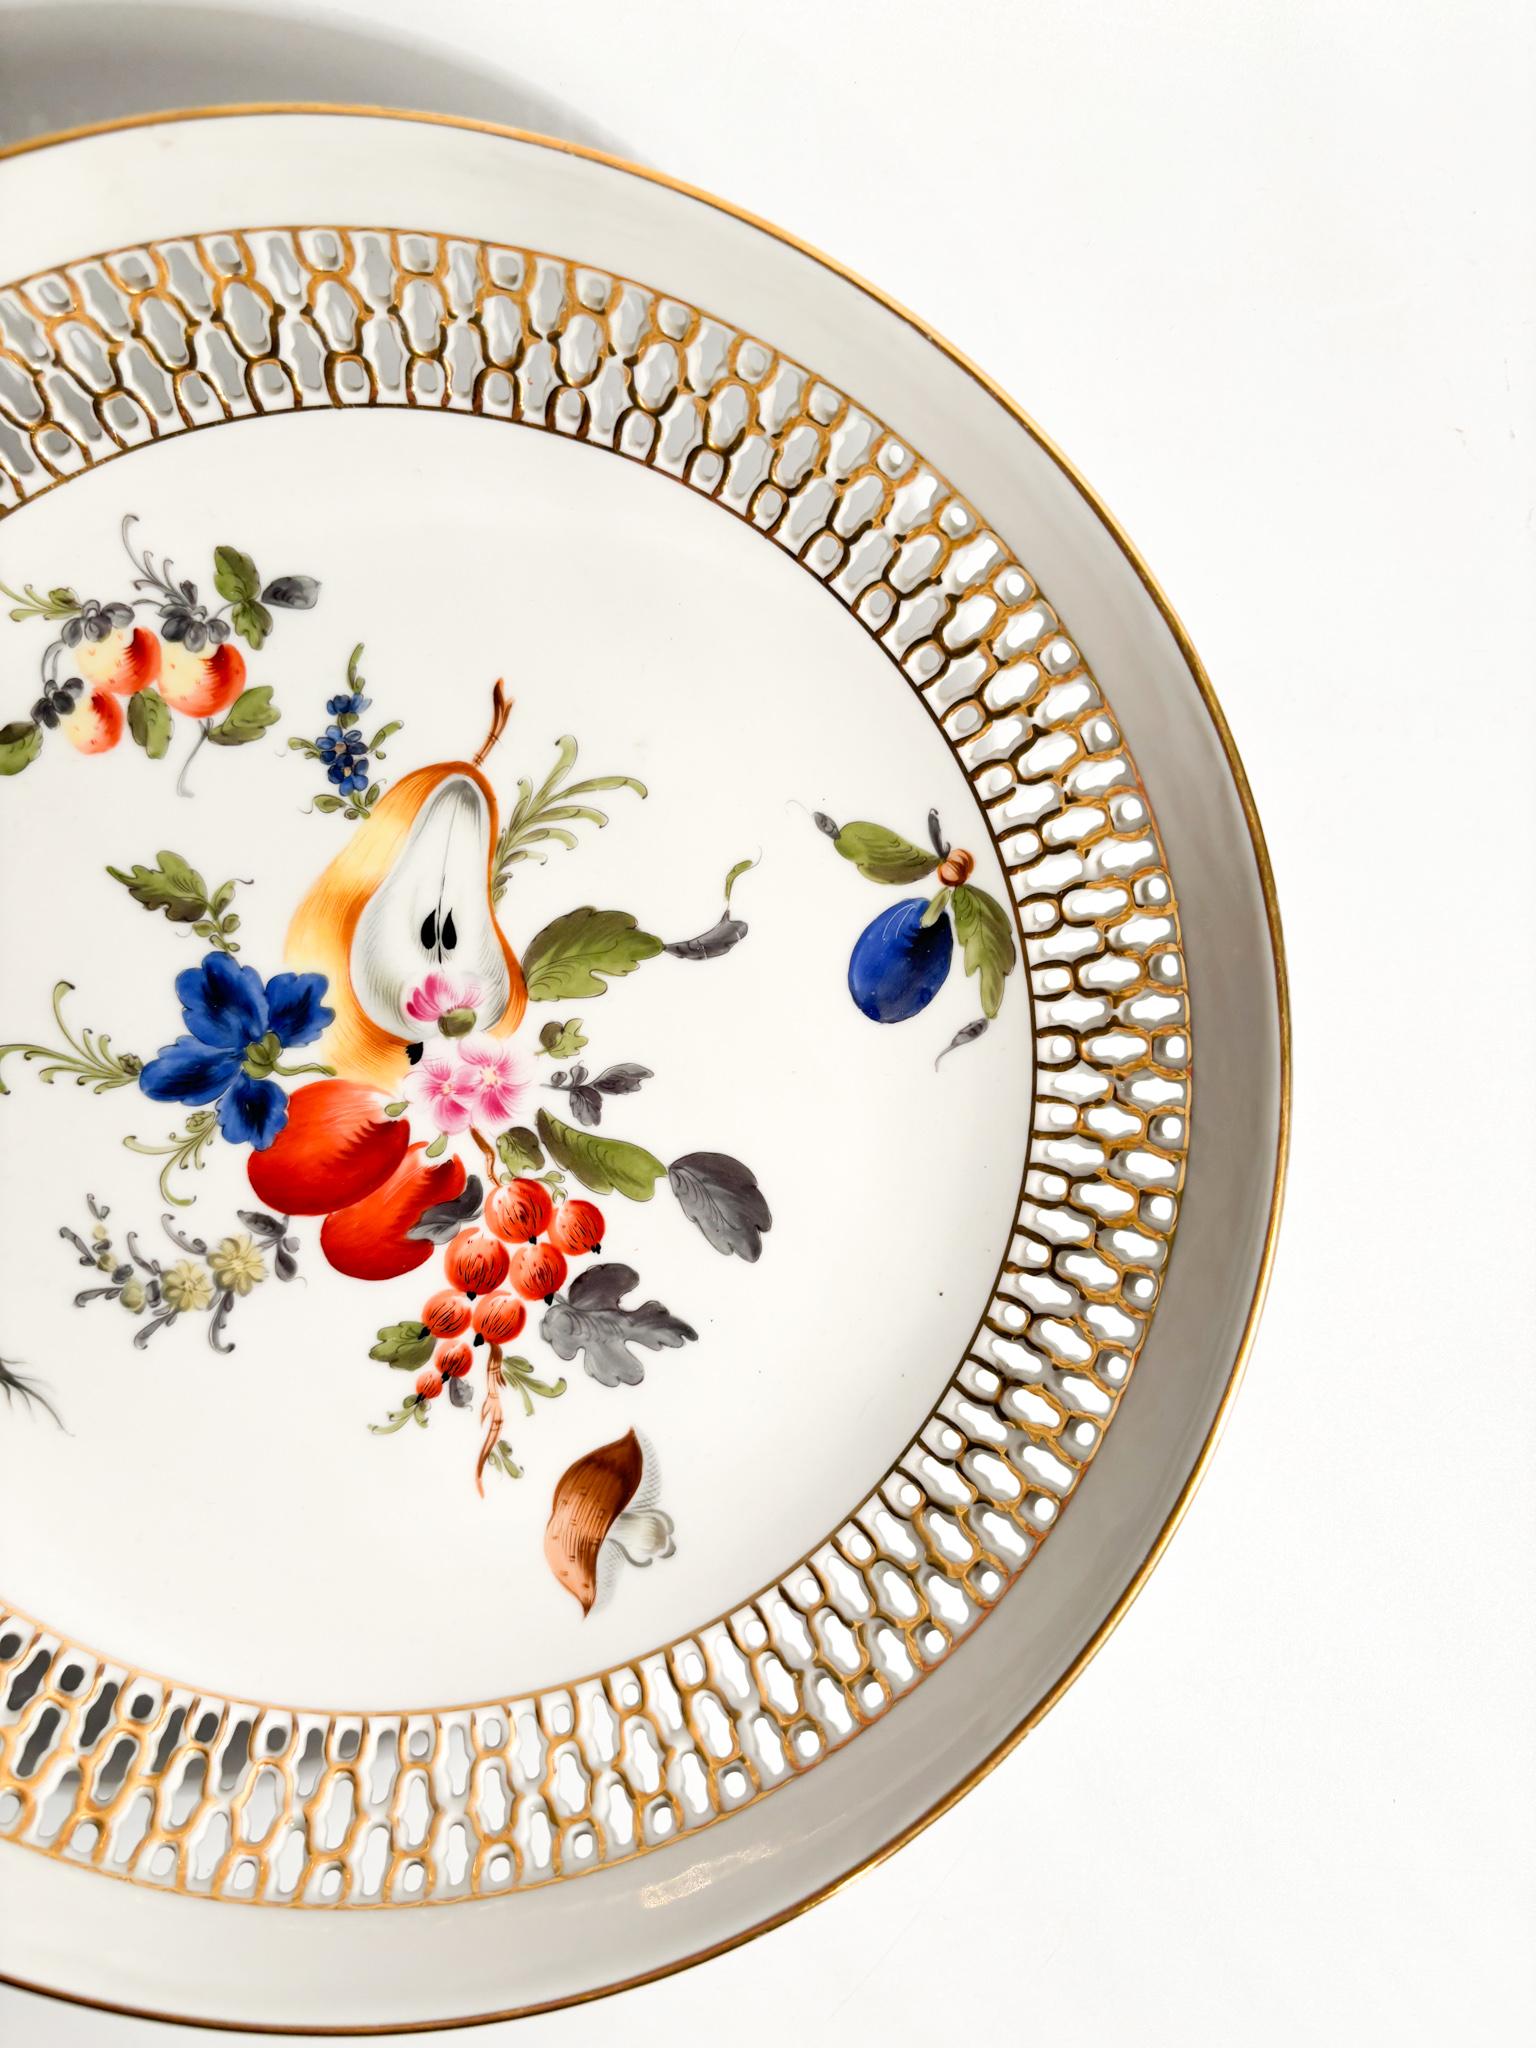 Hungarian Herend Porcelain Centerpiece with Fruit Motif from the 1960s